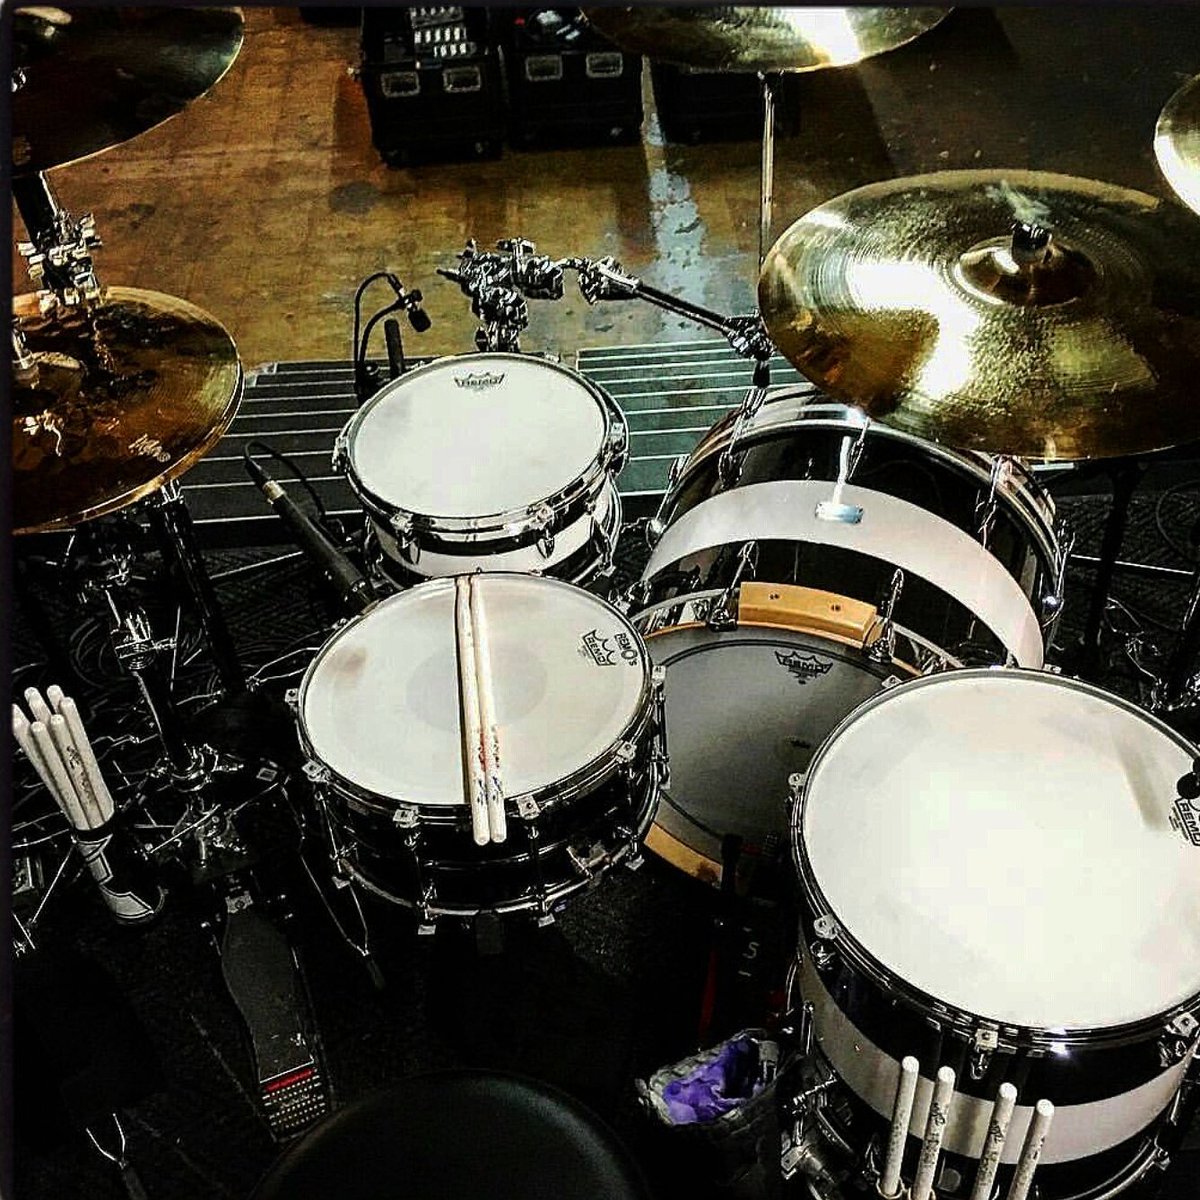 RT @remopercussion: #Drumheads @travisbarker used on the new @blink182 album! Snare: Emperor X, Toms: Coated Emperors, Kick: Coated P3 http…